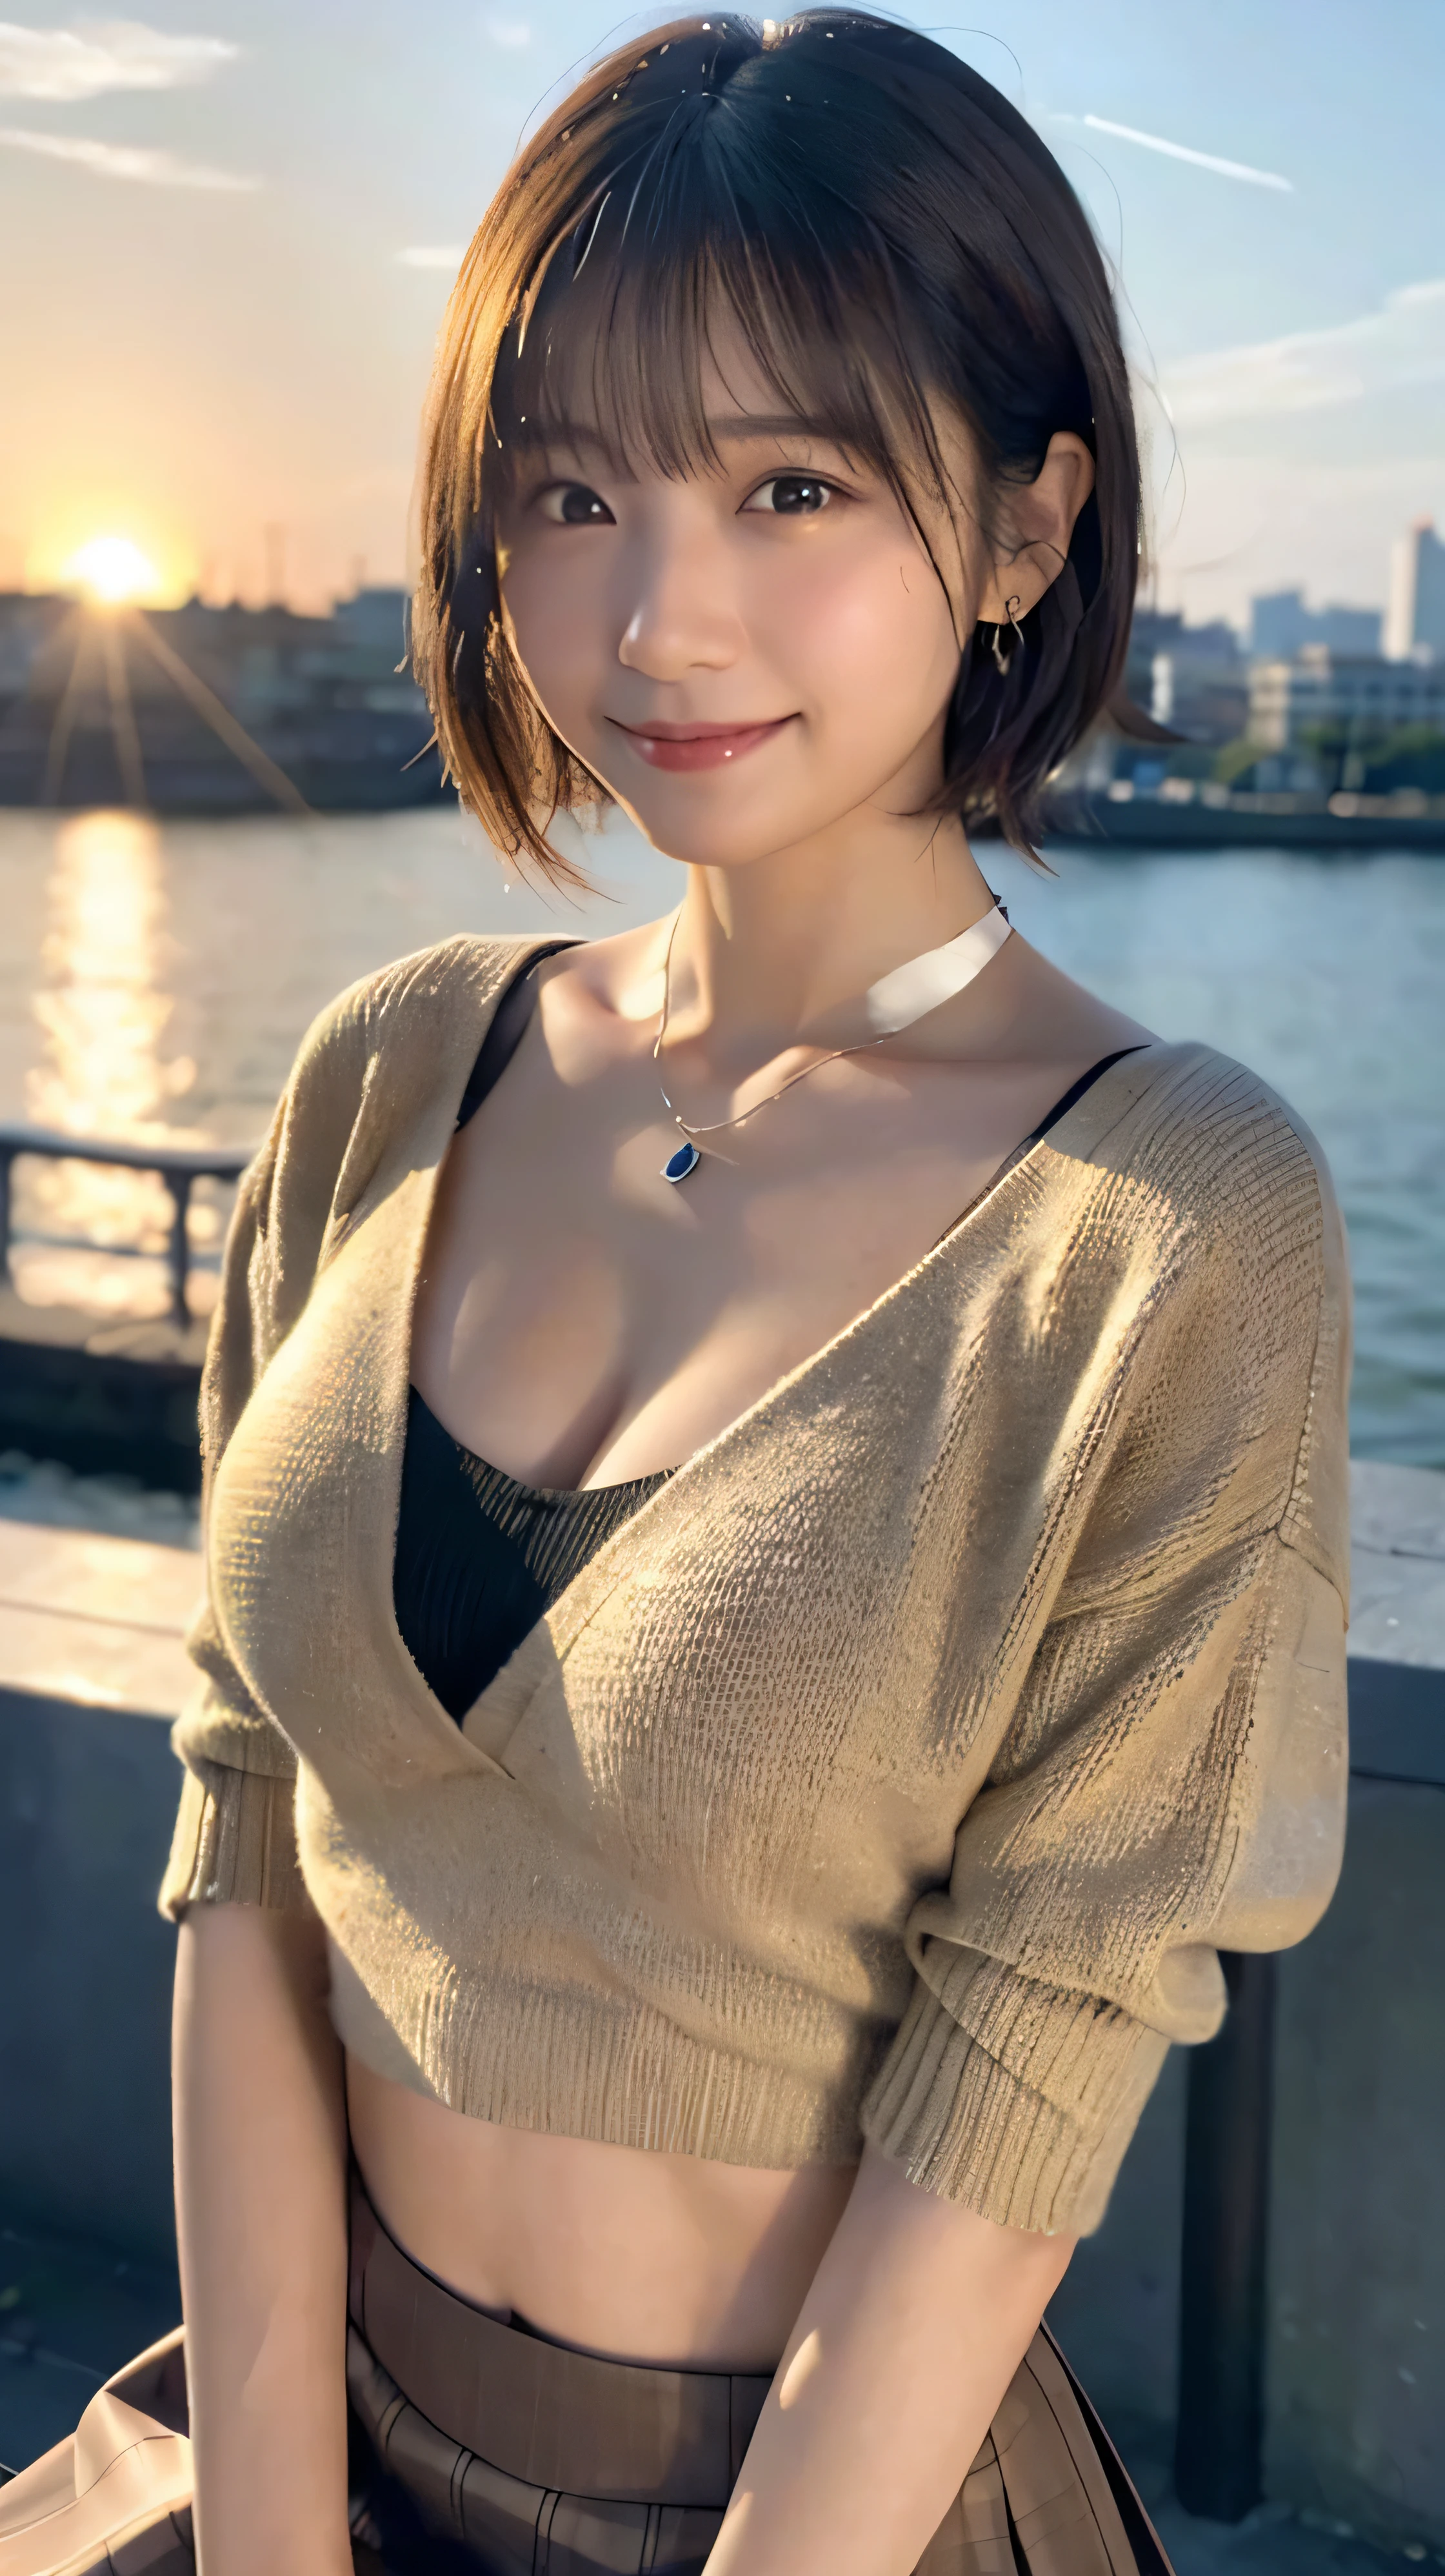 (highest quality,masterpiece:1.3,ultra high resolution),(Super detailed,caustics,8K),(realistic:1.4,RAW shooting),18-year-old,cute,Japanese,Short brown hair with outward curls,(Beige summer knitwear),(smile),look up at the camera、(Short brown skirt),blue sky,sun,Backlight,(coastline),(sunset、sunset:1.1),,(Photographed from the waist up),(face focus),(close up face),(High Situation:1.3),(high angle:1.3),Natural light 、Embarrassed smile、parted bangs、big breasts、With small earrings、silver necklace、((G cup、big breasts))、Embarrassed smile、((Camera angle is diagonal:1.2))、Today I came to the port town.、Head tilt gesture